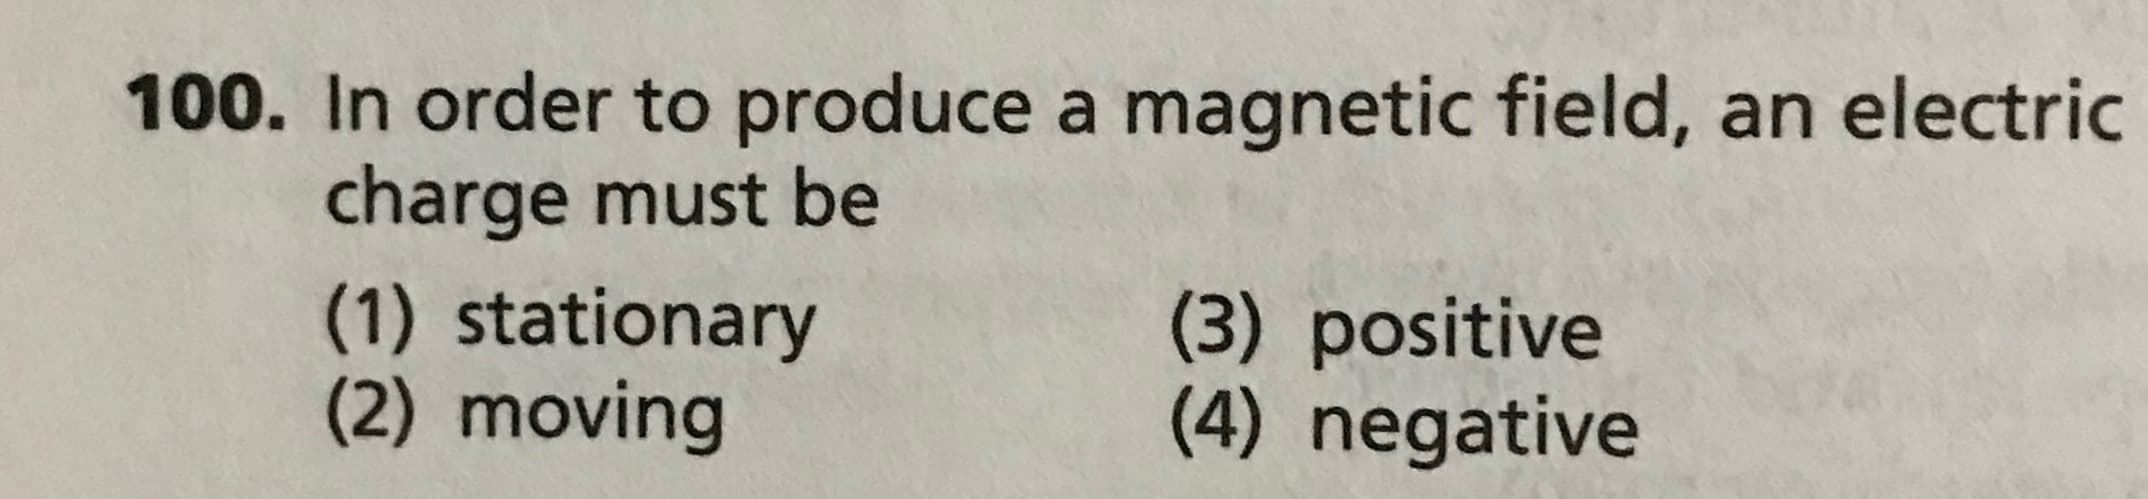 In order to produce a magnetic field, an electric
charge must be
(1) stationary
(2) moving
(3) positive
(4) negative
